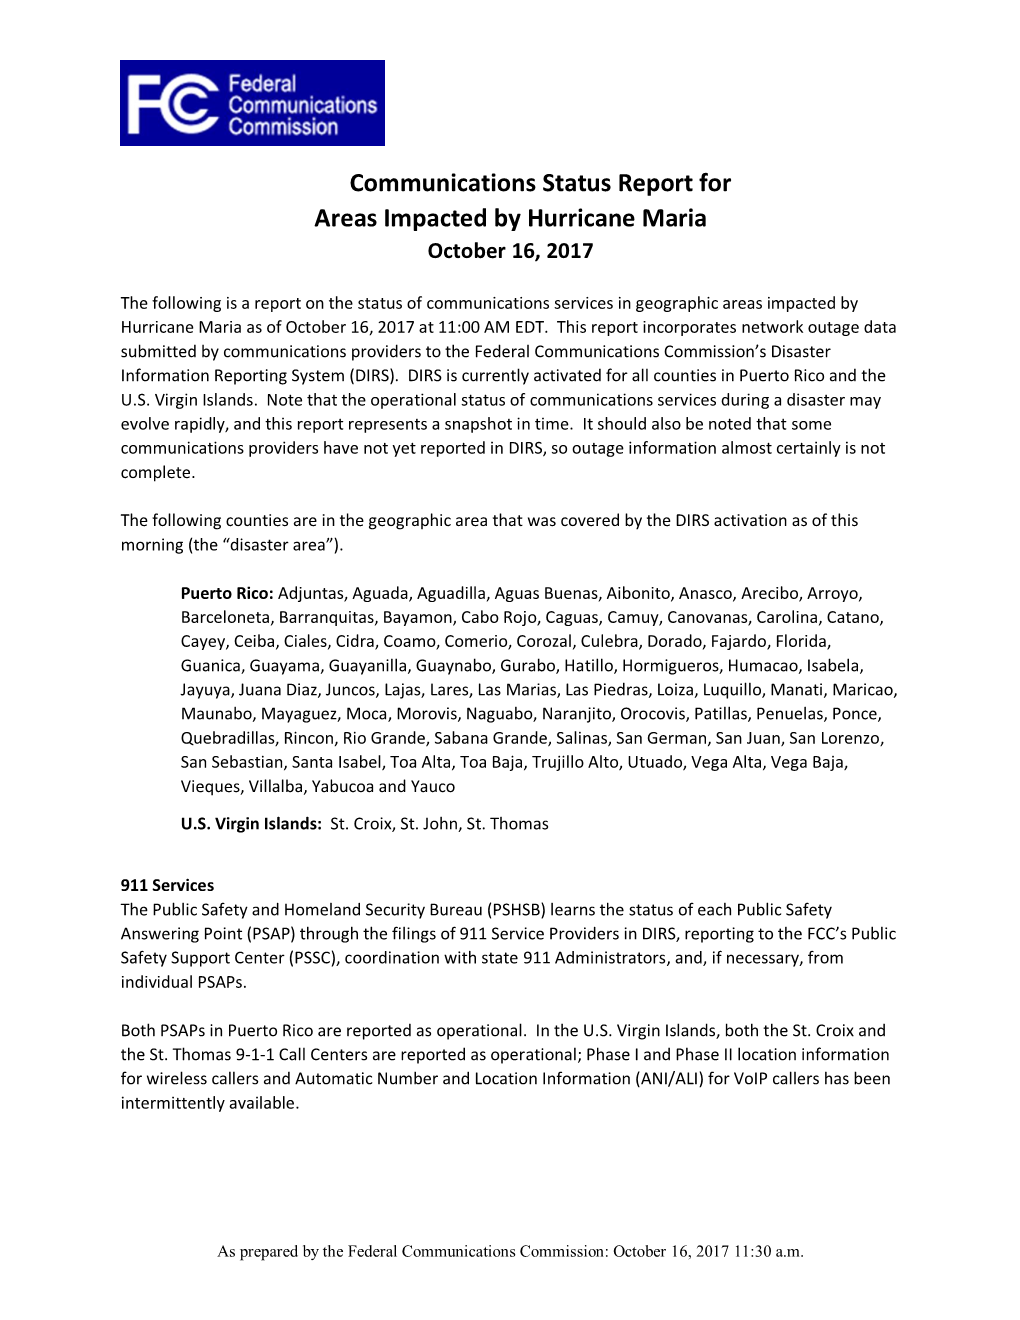 Communications Status Report for Areas Impacted by Hurricane Maria October 16, 2017